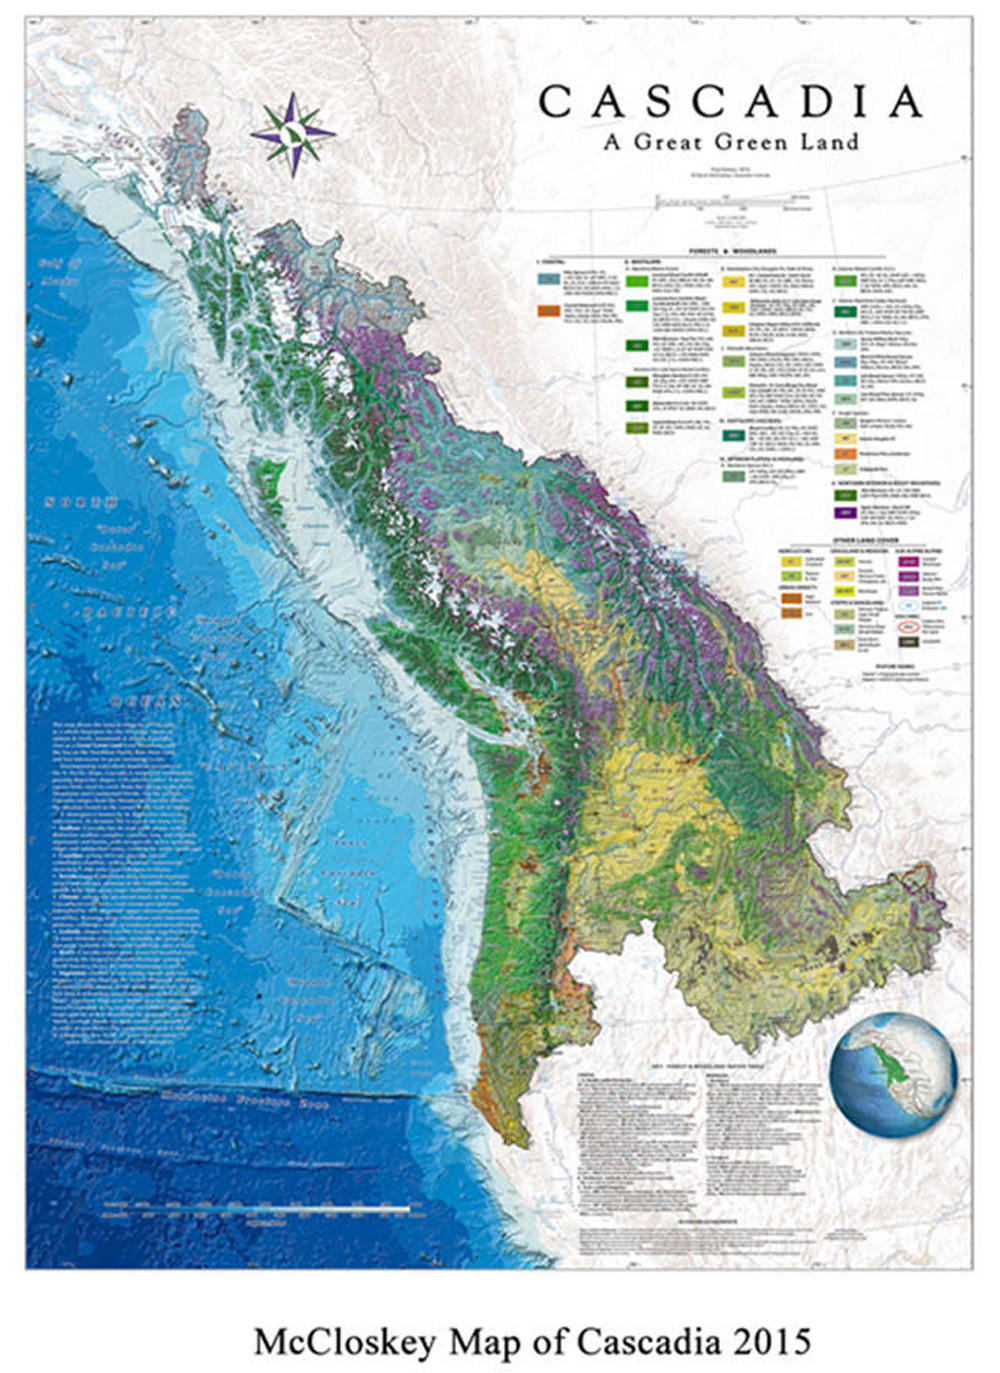 Map of Cascadia by David McCloskey titled “Cascadia A Great Green Land” 